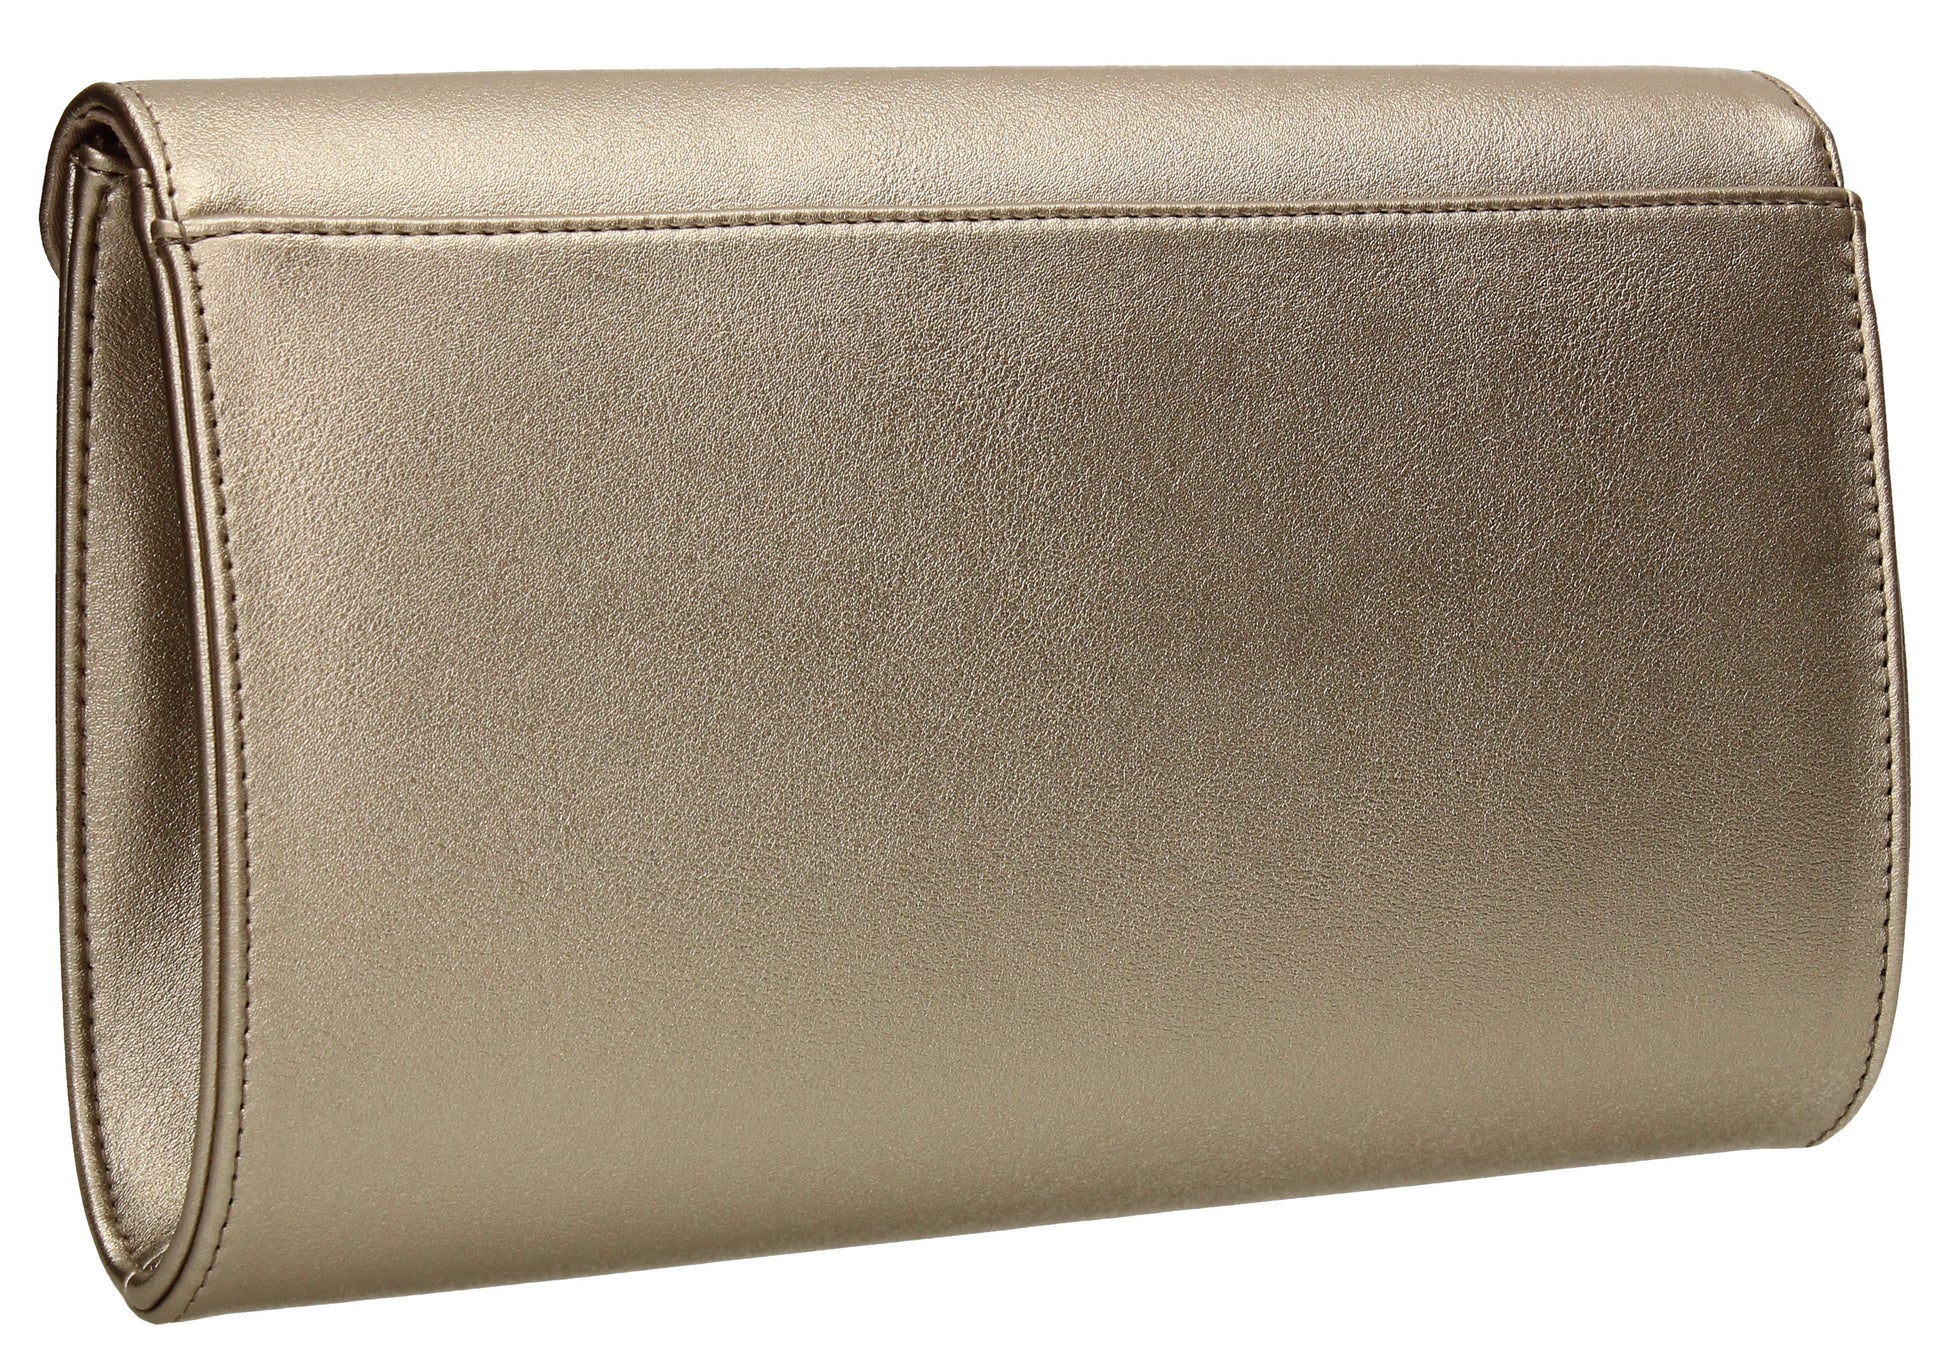 SWANKYSWANS Seraphina Clutch Bag Pewter Cute Cheap Clutch Bag For Weddings School and Work